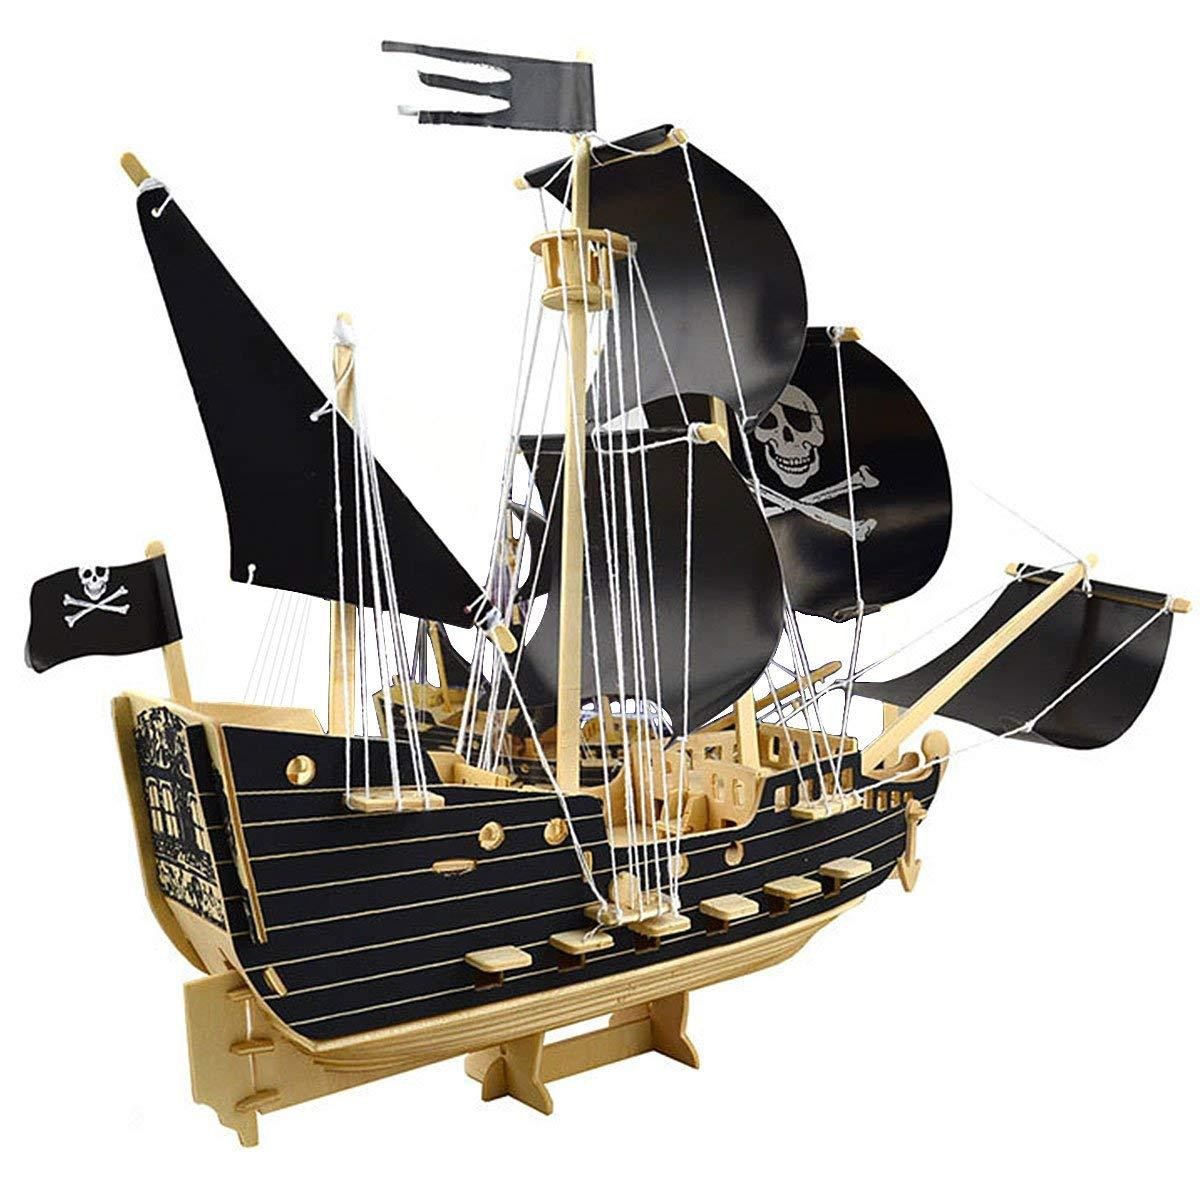 Boat Papercraft Pirate Ship Wooden Models 3d Wooden Sailing Ships Models Puzzle